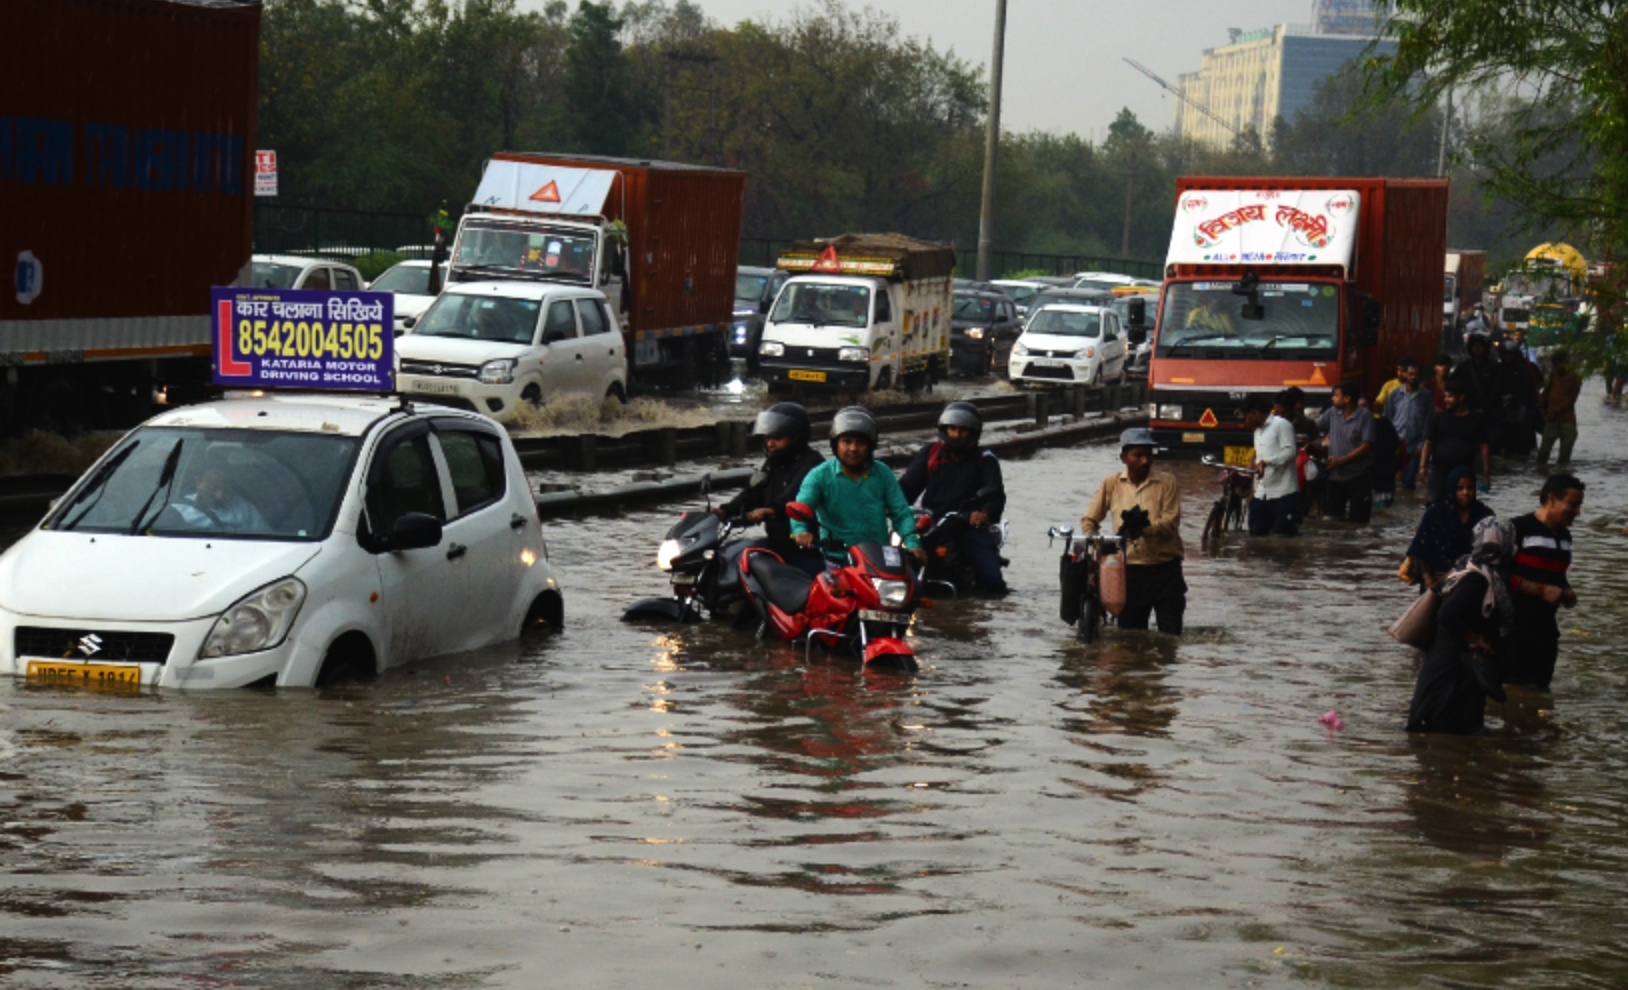 Flooding in Delhi, India, in March.